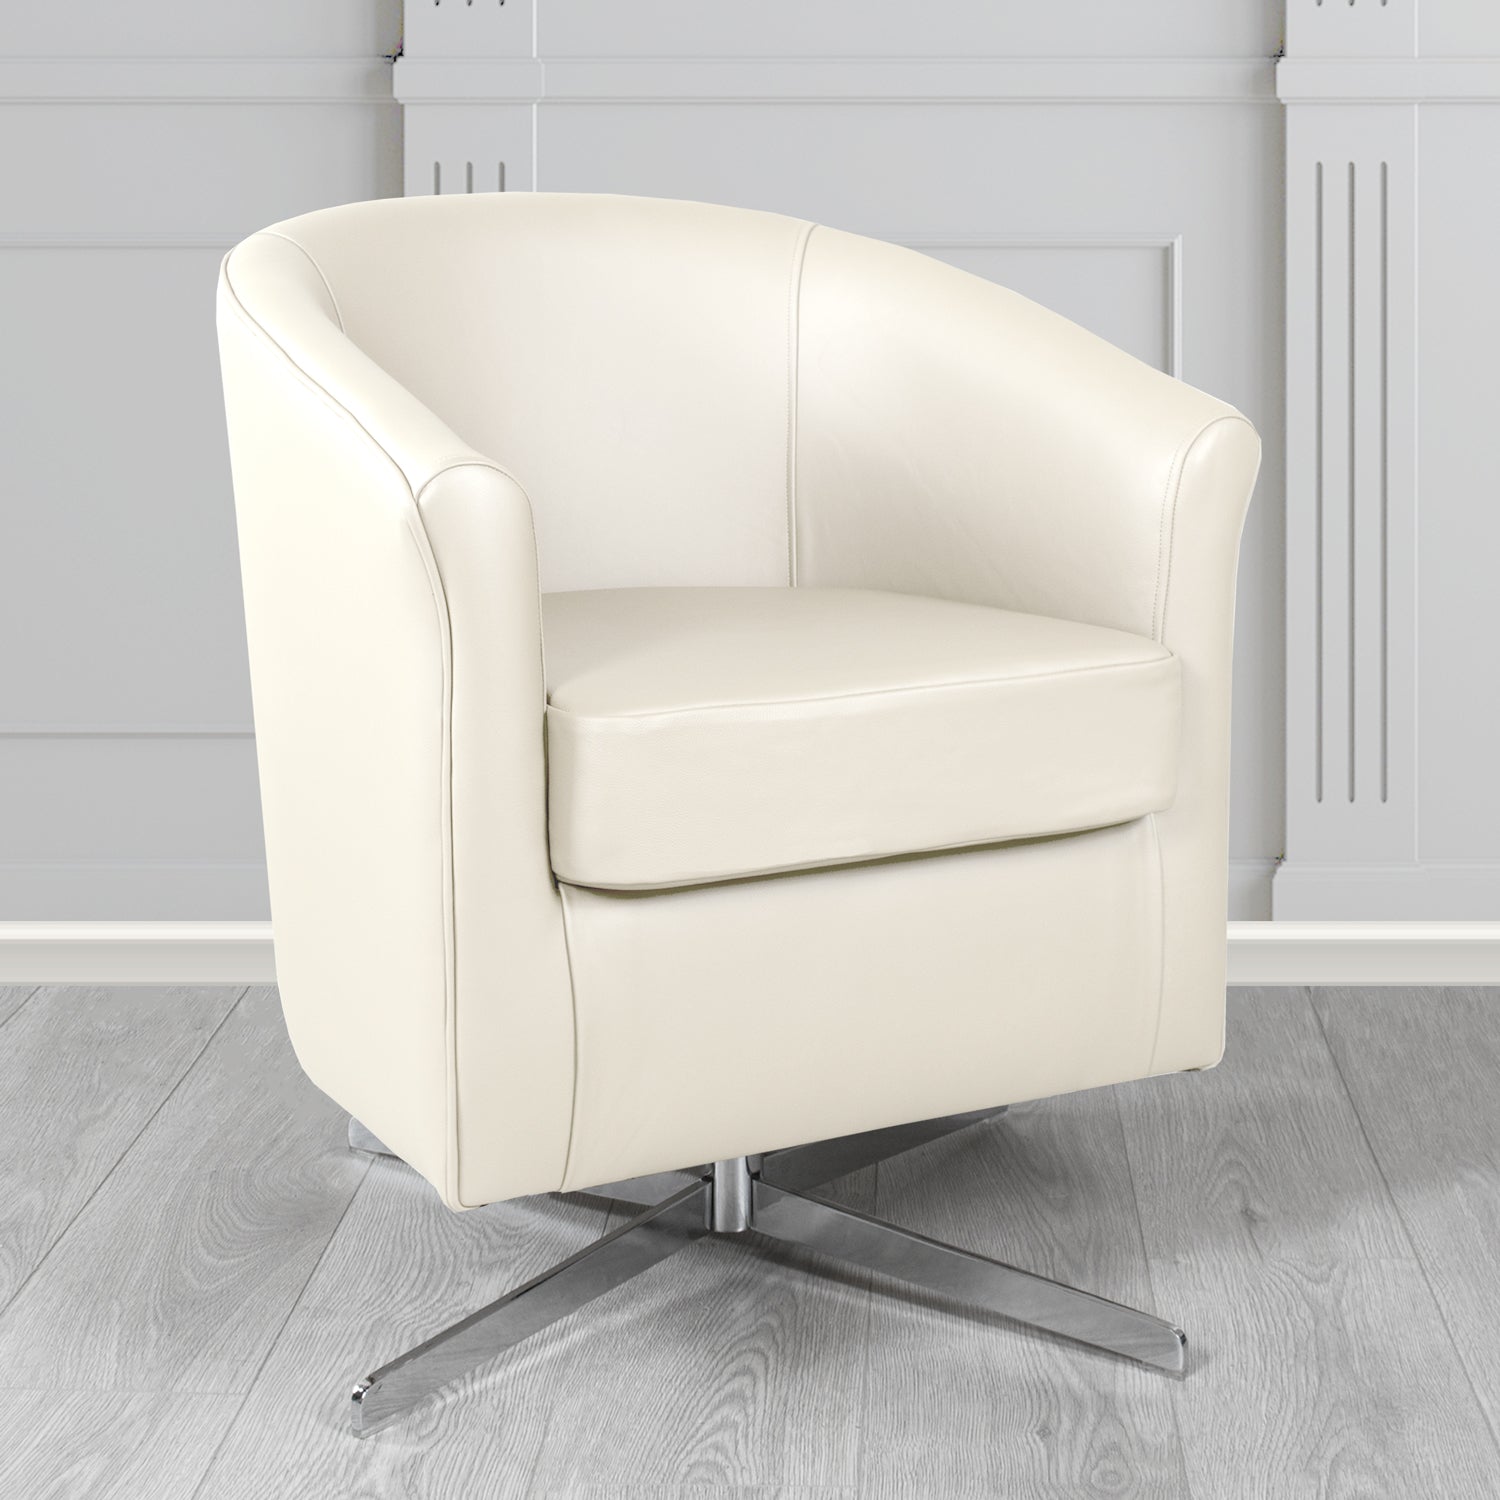 Cannes Swivel Tub Chair in Shelly White Crib 5 Genuine Leather - The Tub Chair Shop